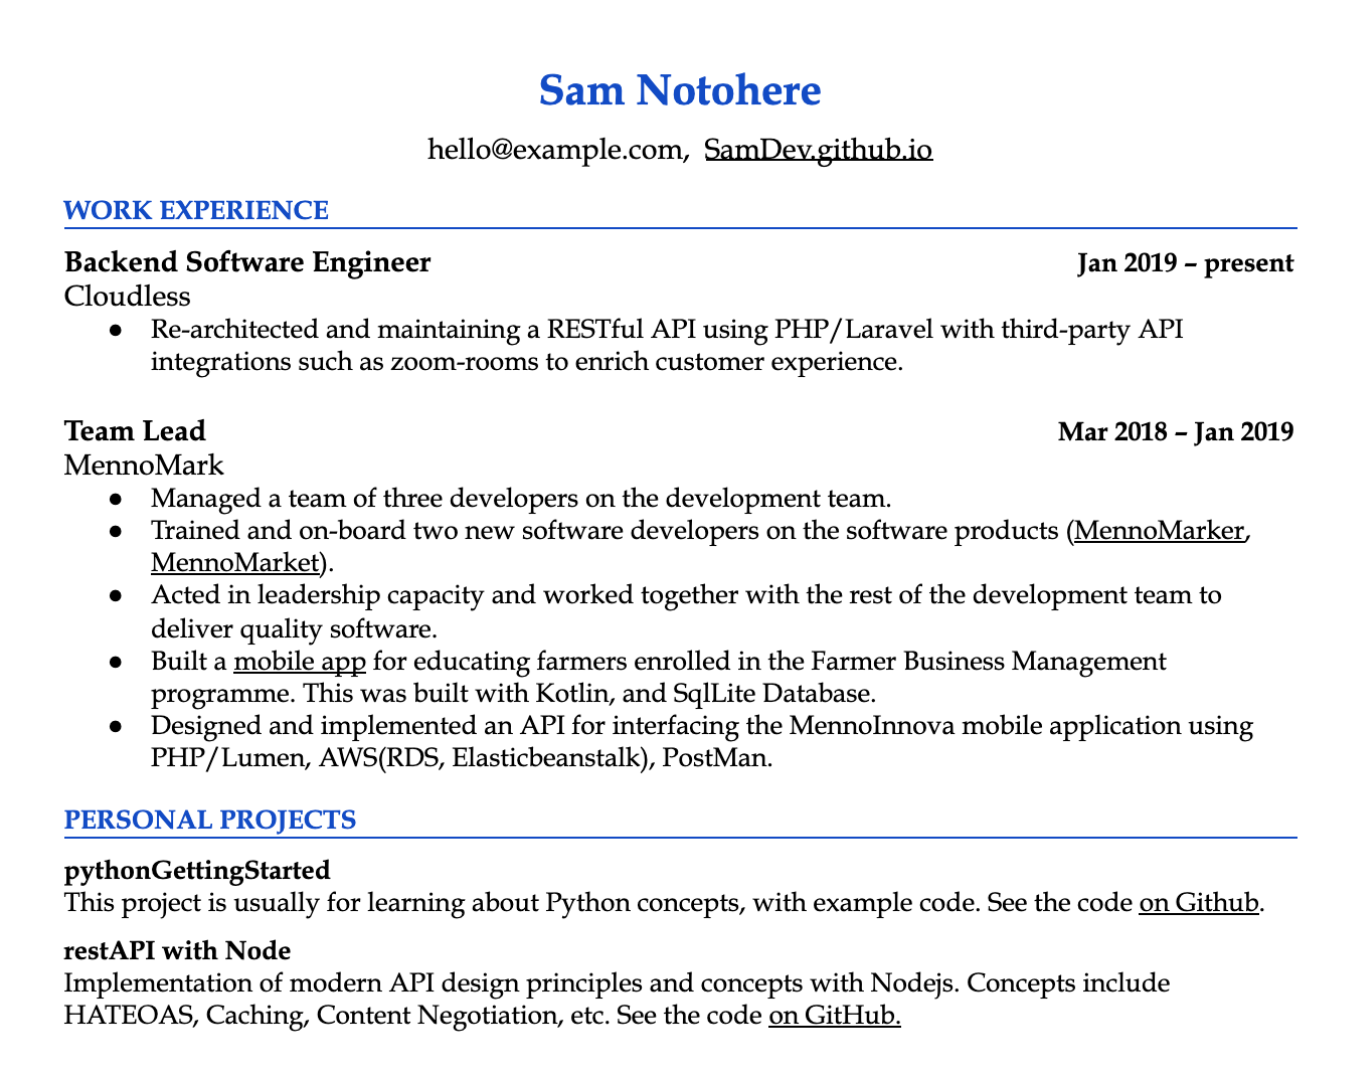 Using colors in other parts of the resume